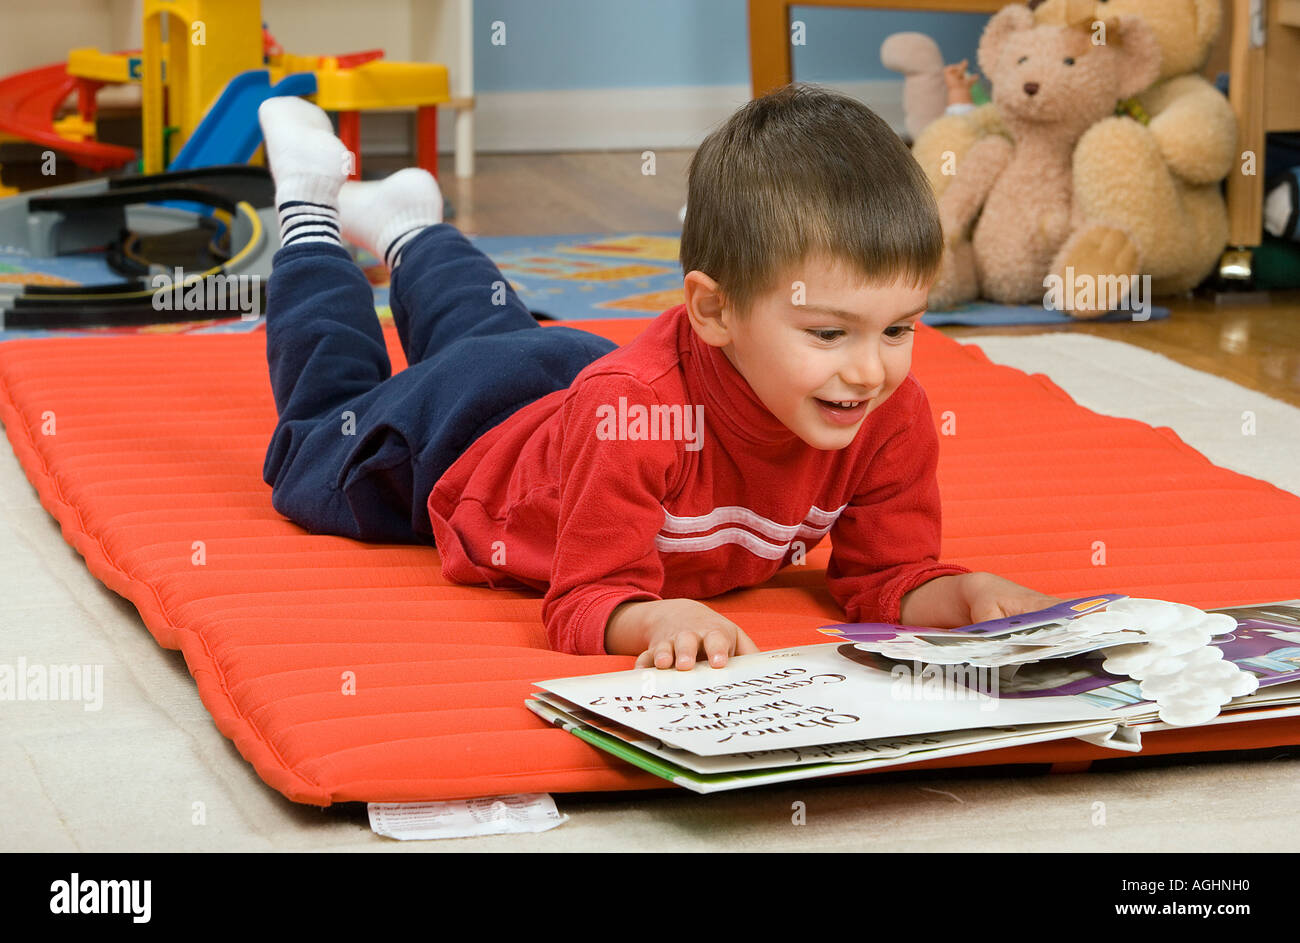 three year old boy lies on floor and looks at a pop up picture book Stock Photo